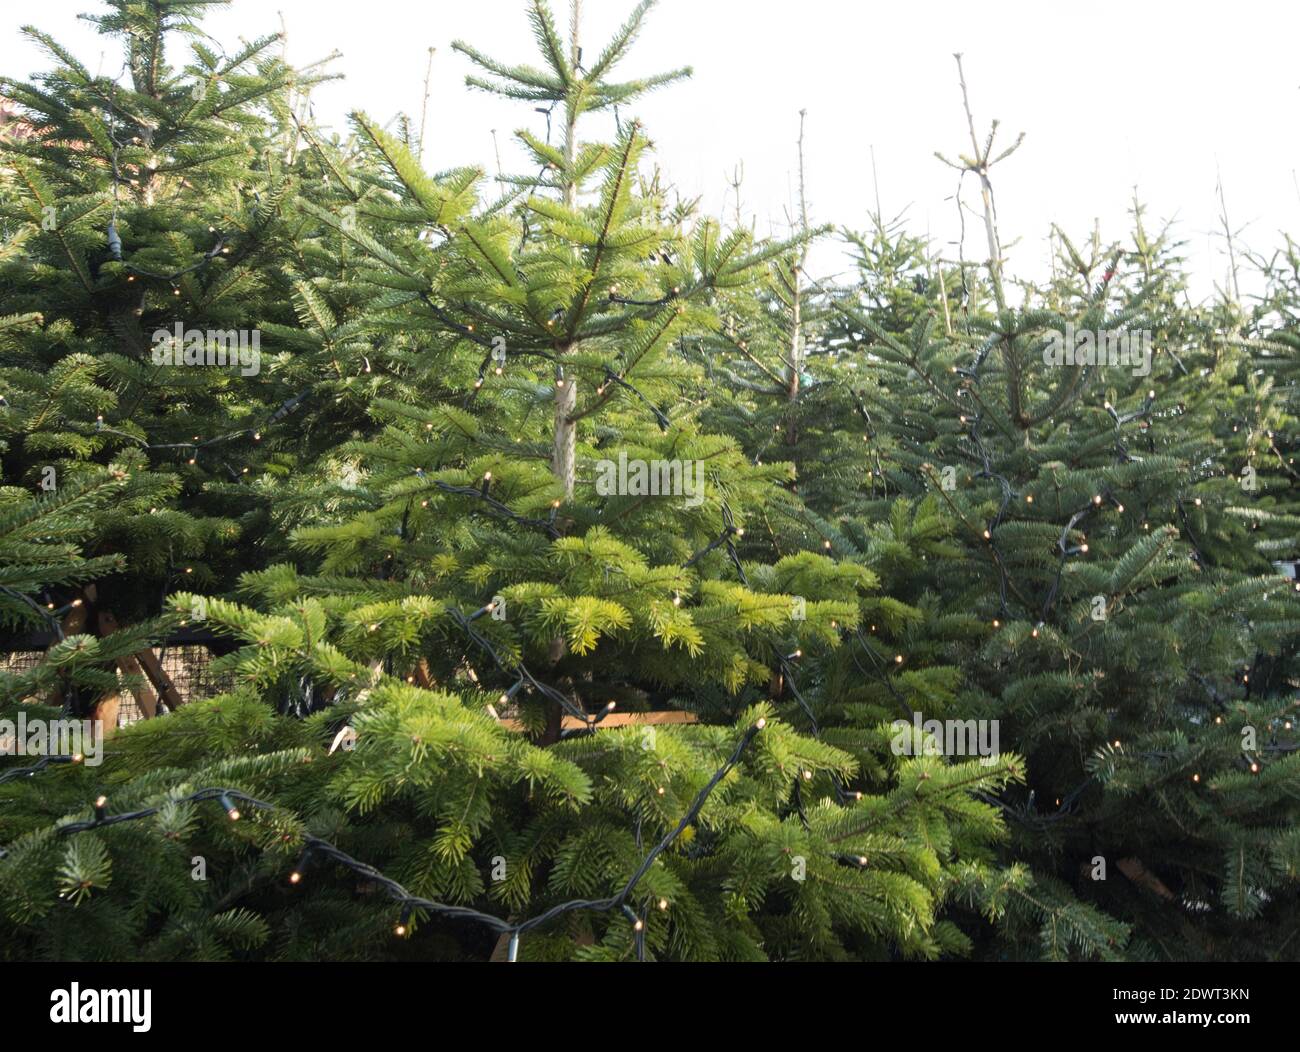 a christmas tree as a decoration in the holiday season Stock Photo